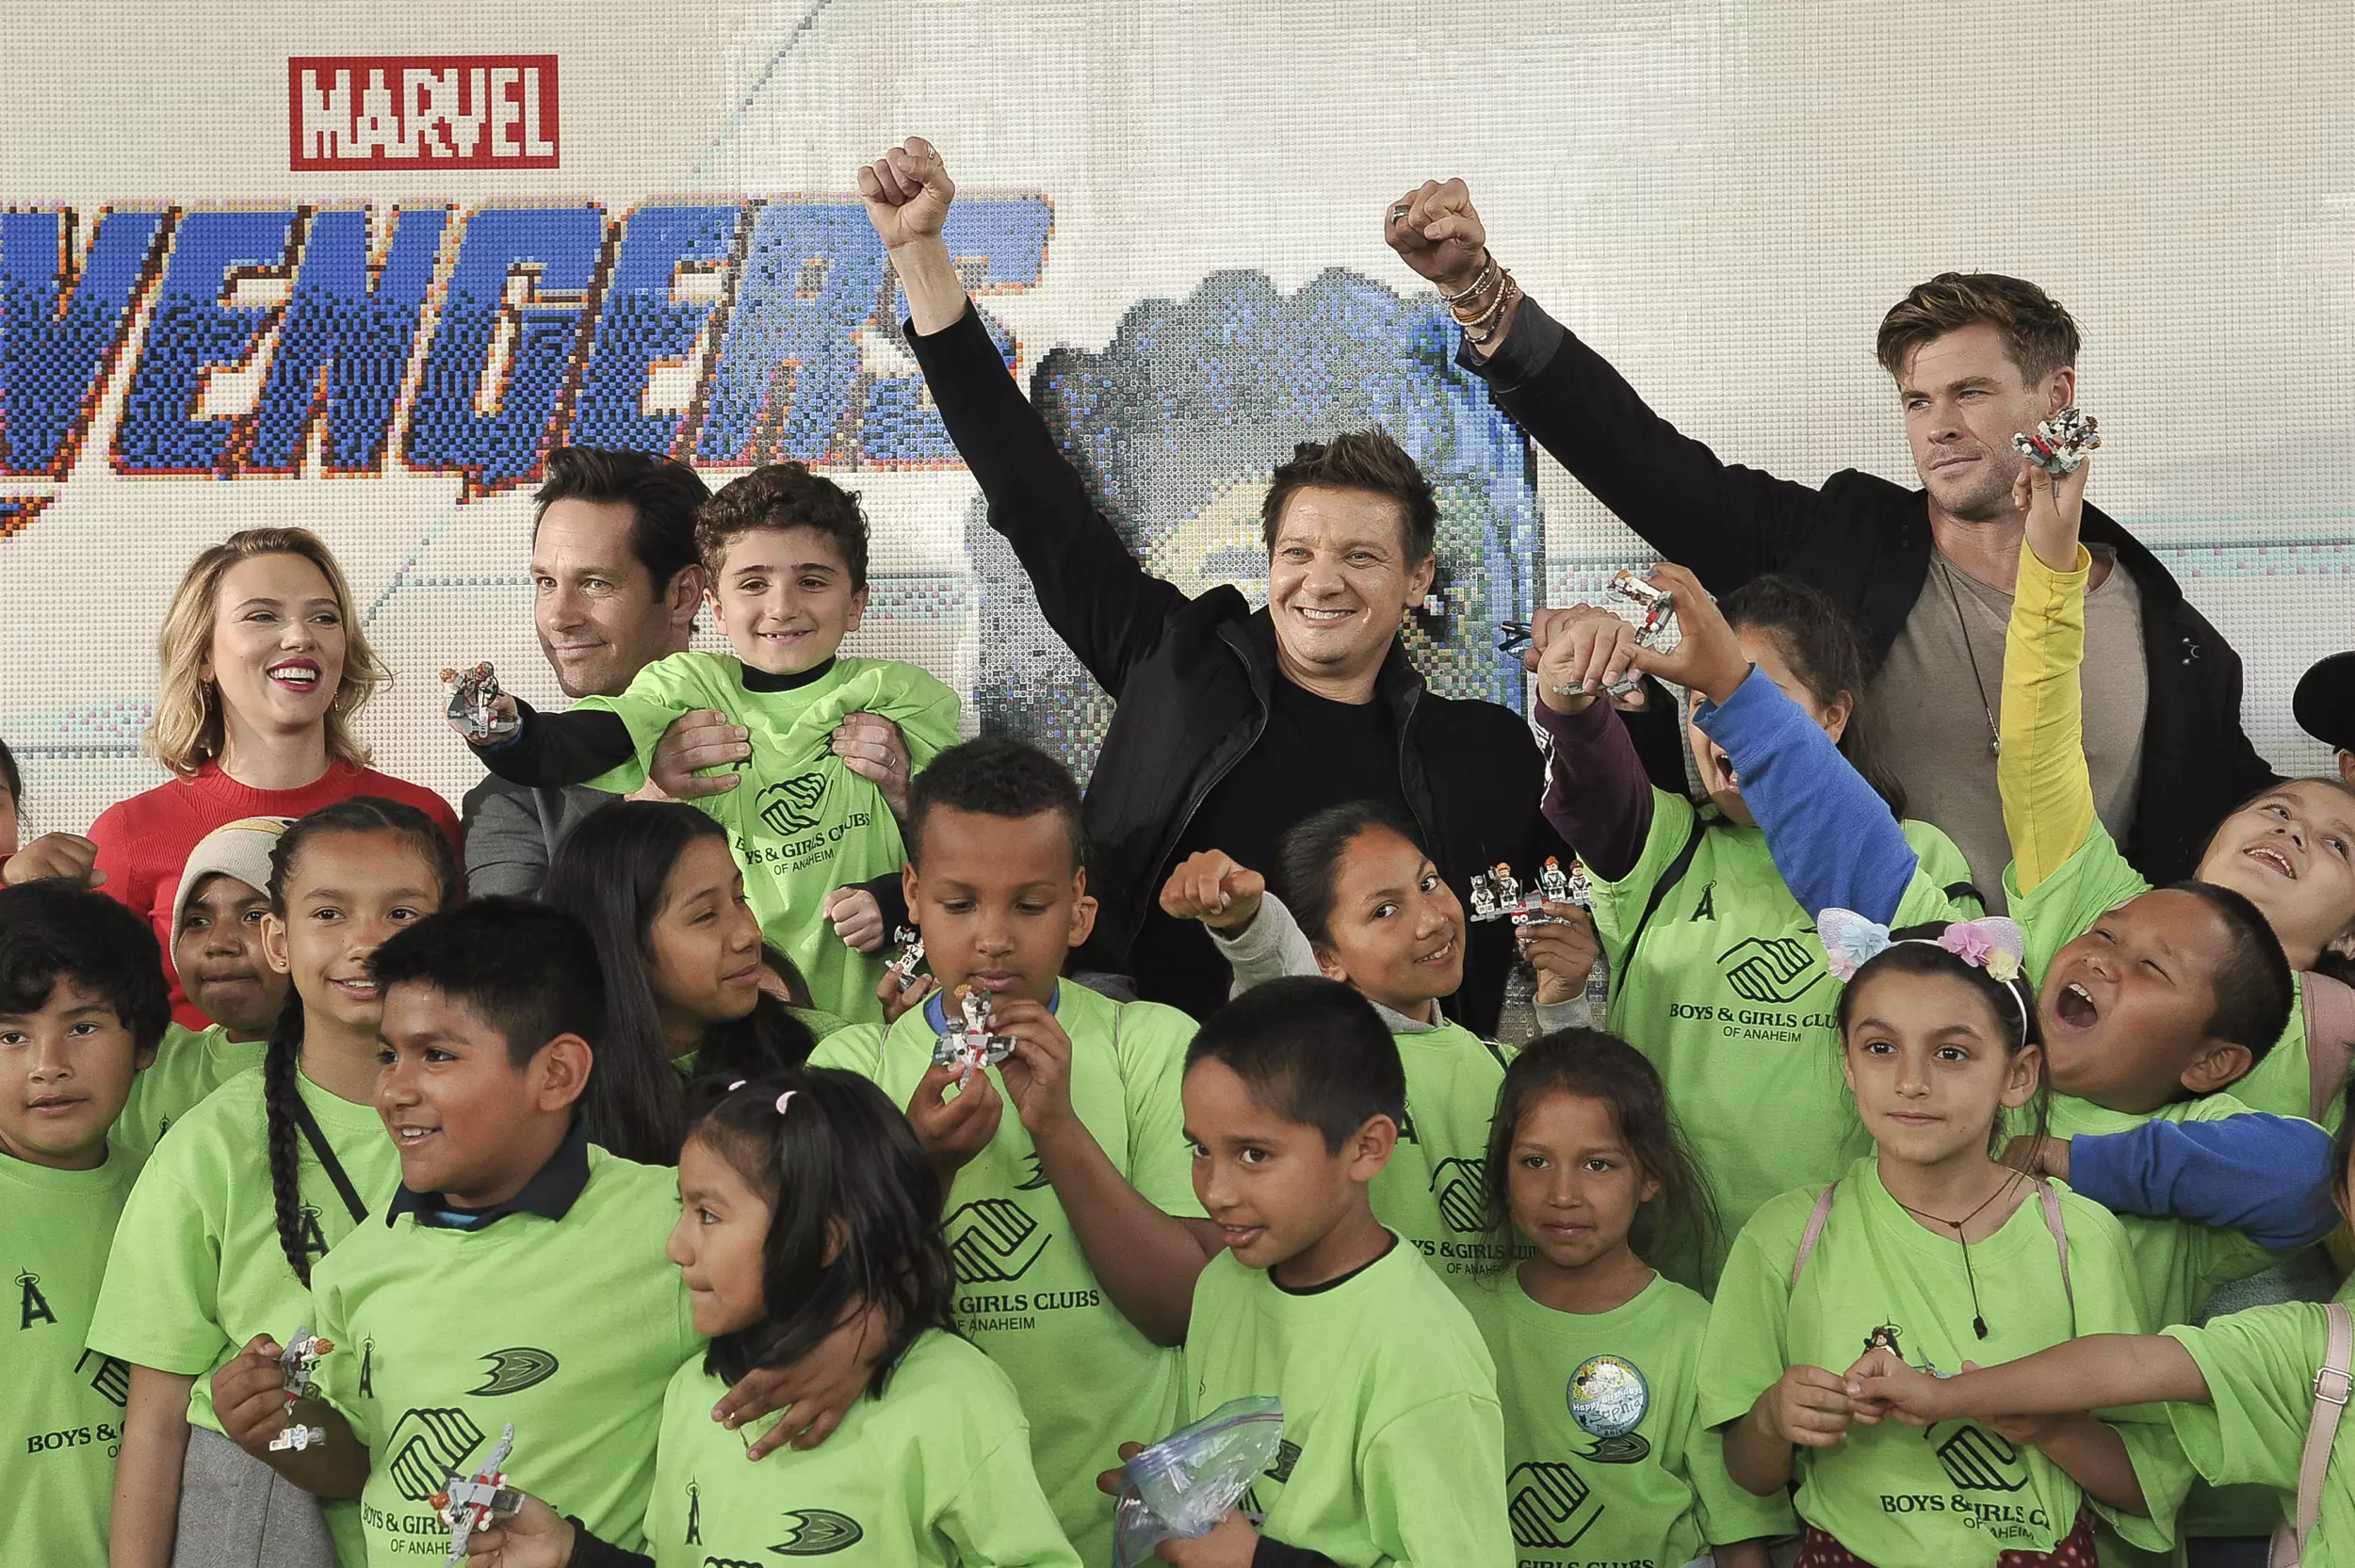 The Avengers stars with some of the local children.